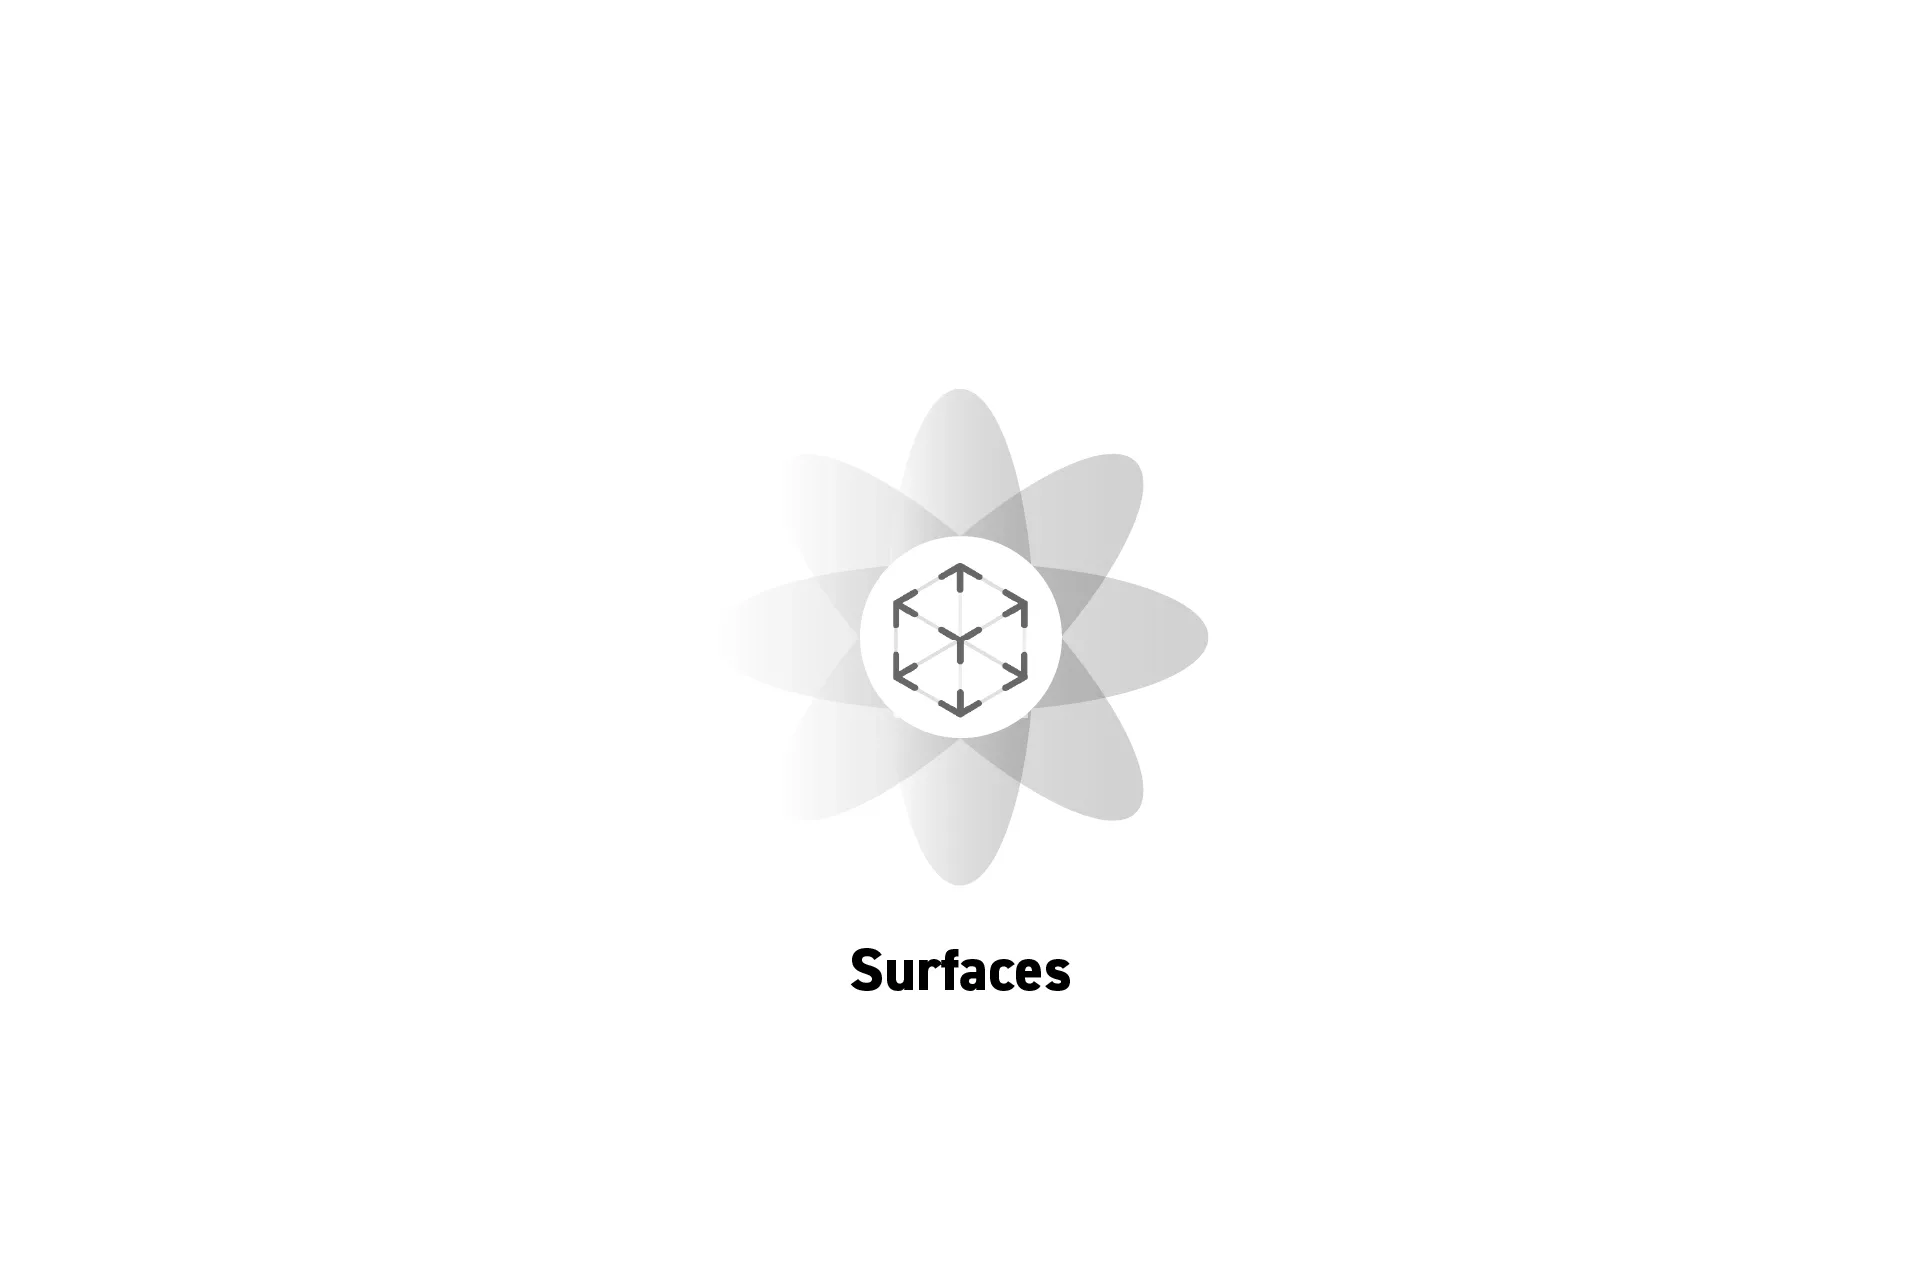 A flower that represents spatial computing with the text "Surfaces" beneath it.